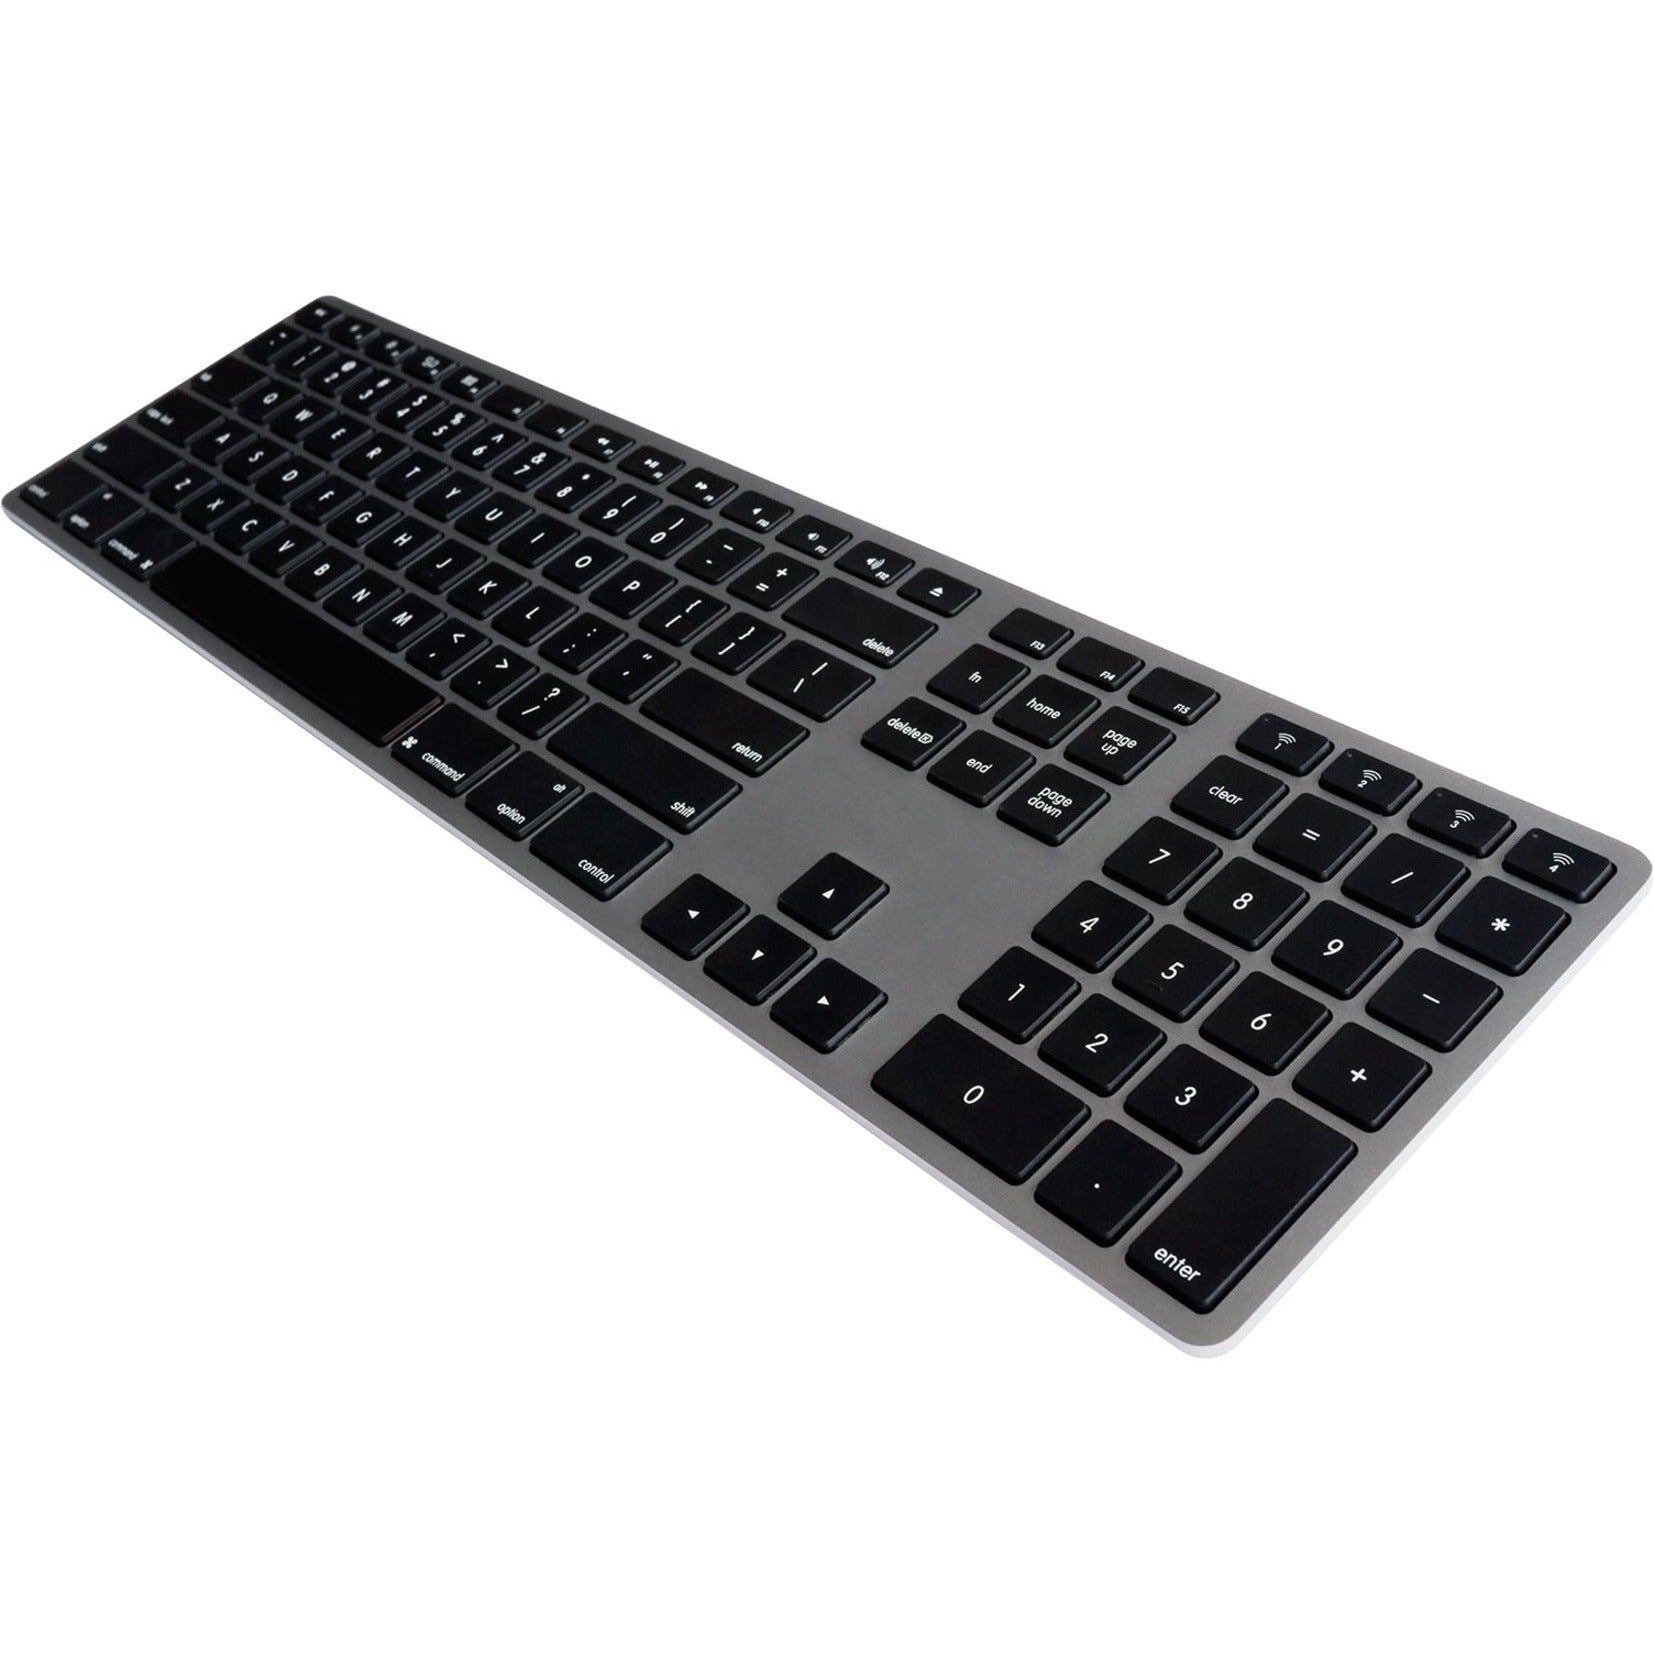 Matias FK418BTB Wireless Bluetooth Aluminum Keyboard Space Gray - Compact and Stylish Keyboard for iPhone, iPad, and Mac OS